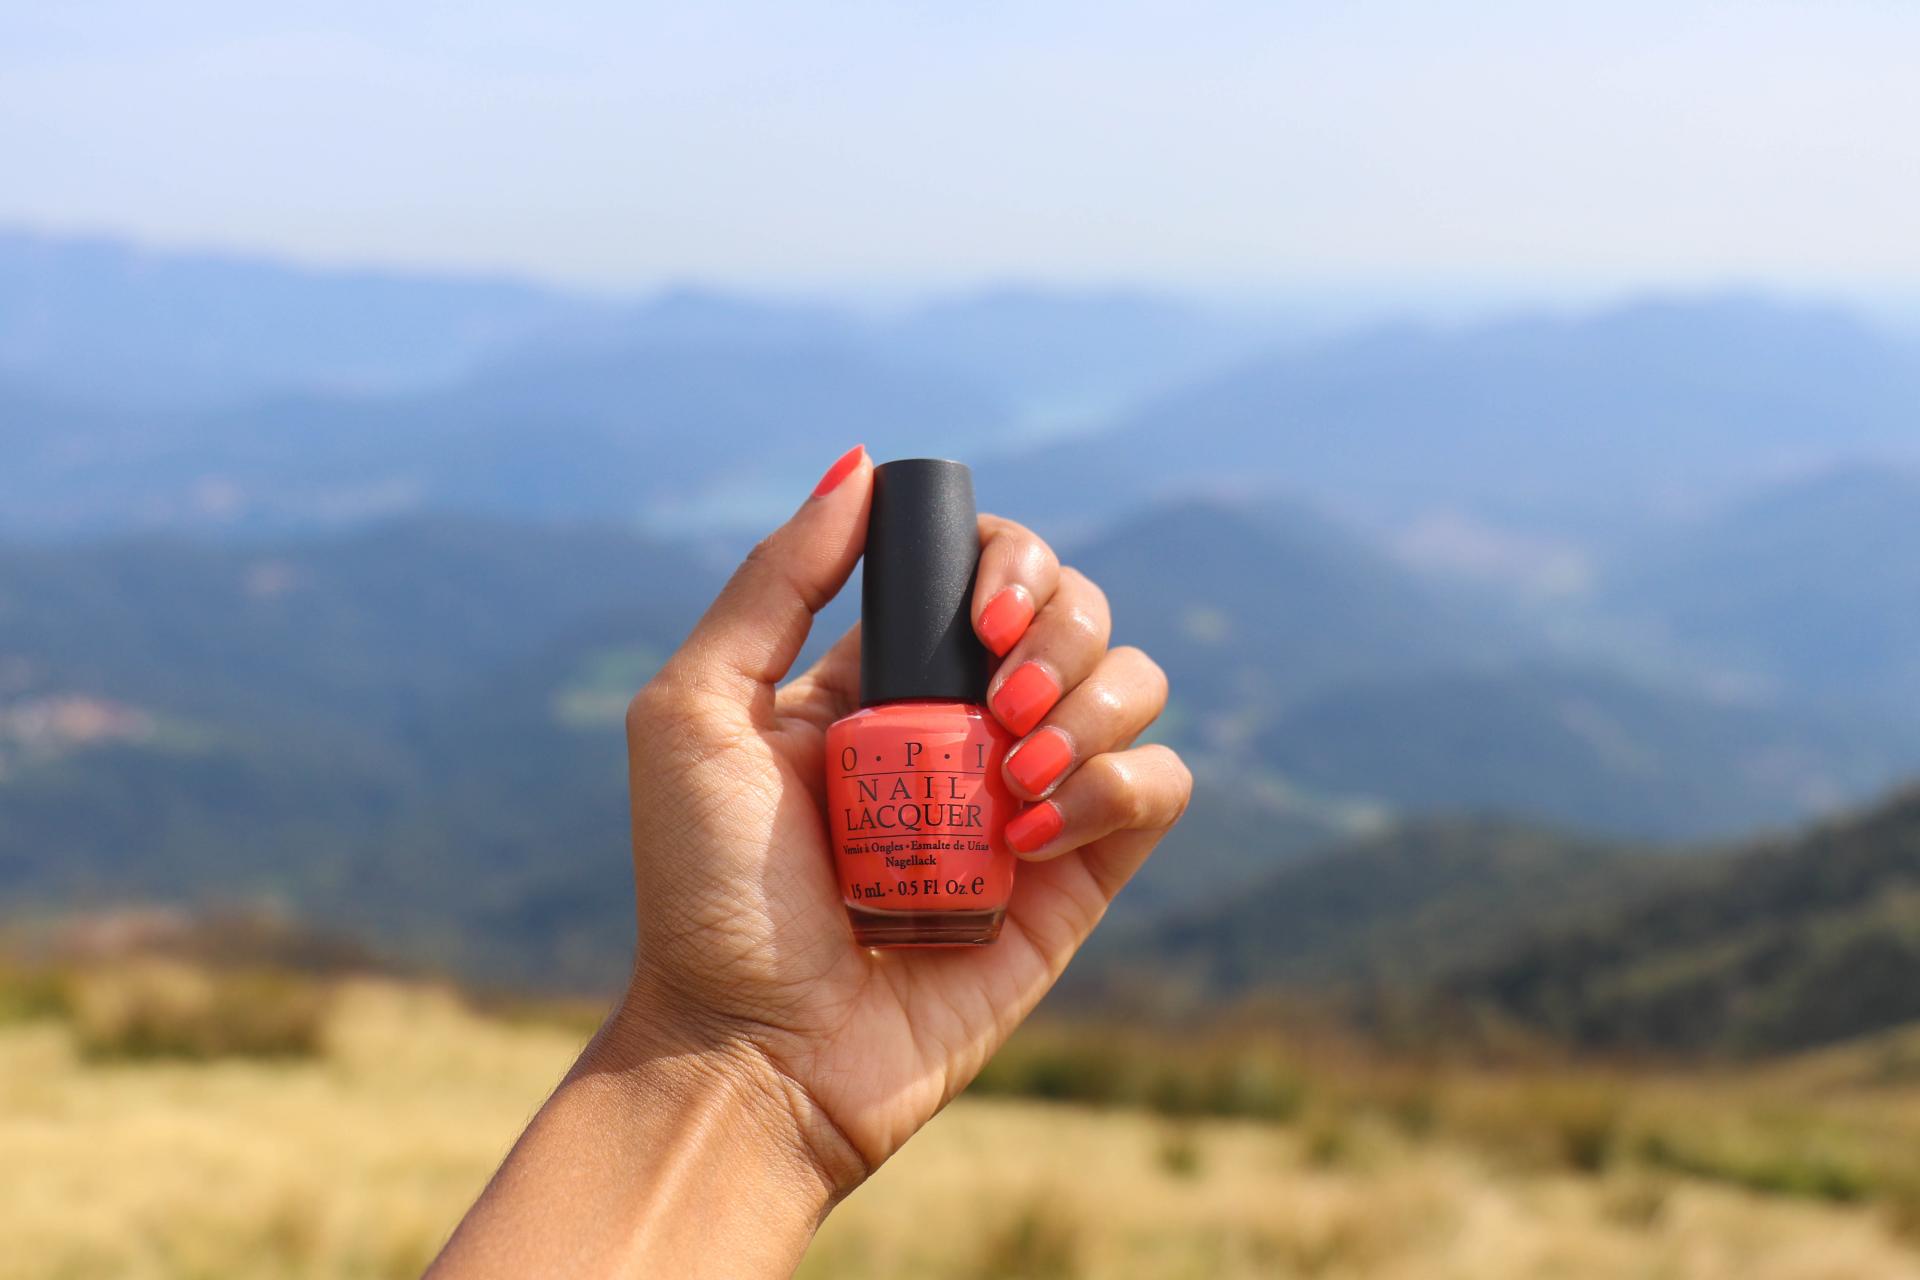 “Hot & Spicy” by OPI